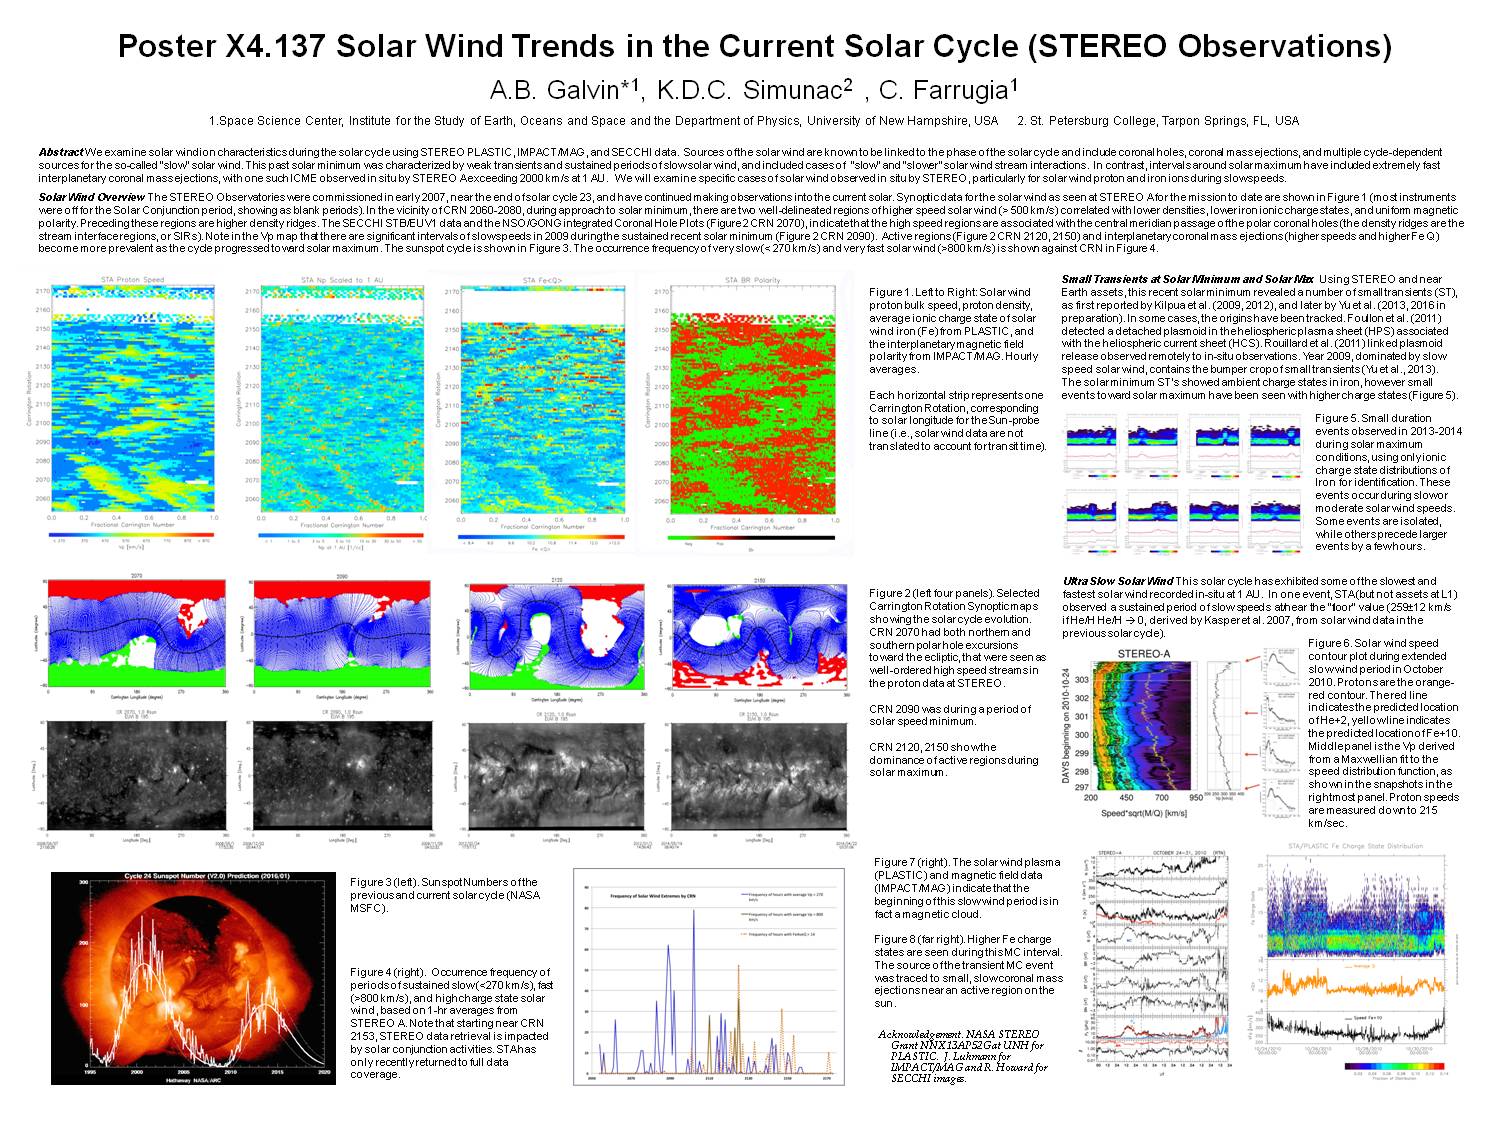 Solar Cycle Trends In The Current Solar Cycle (Stereo) by Antoinette